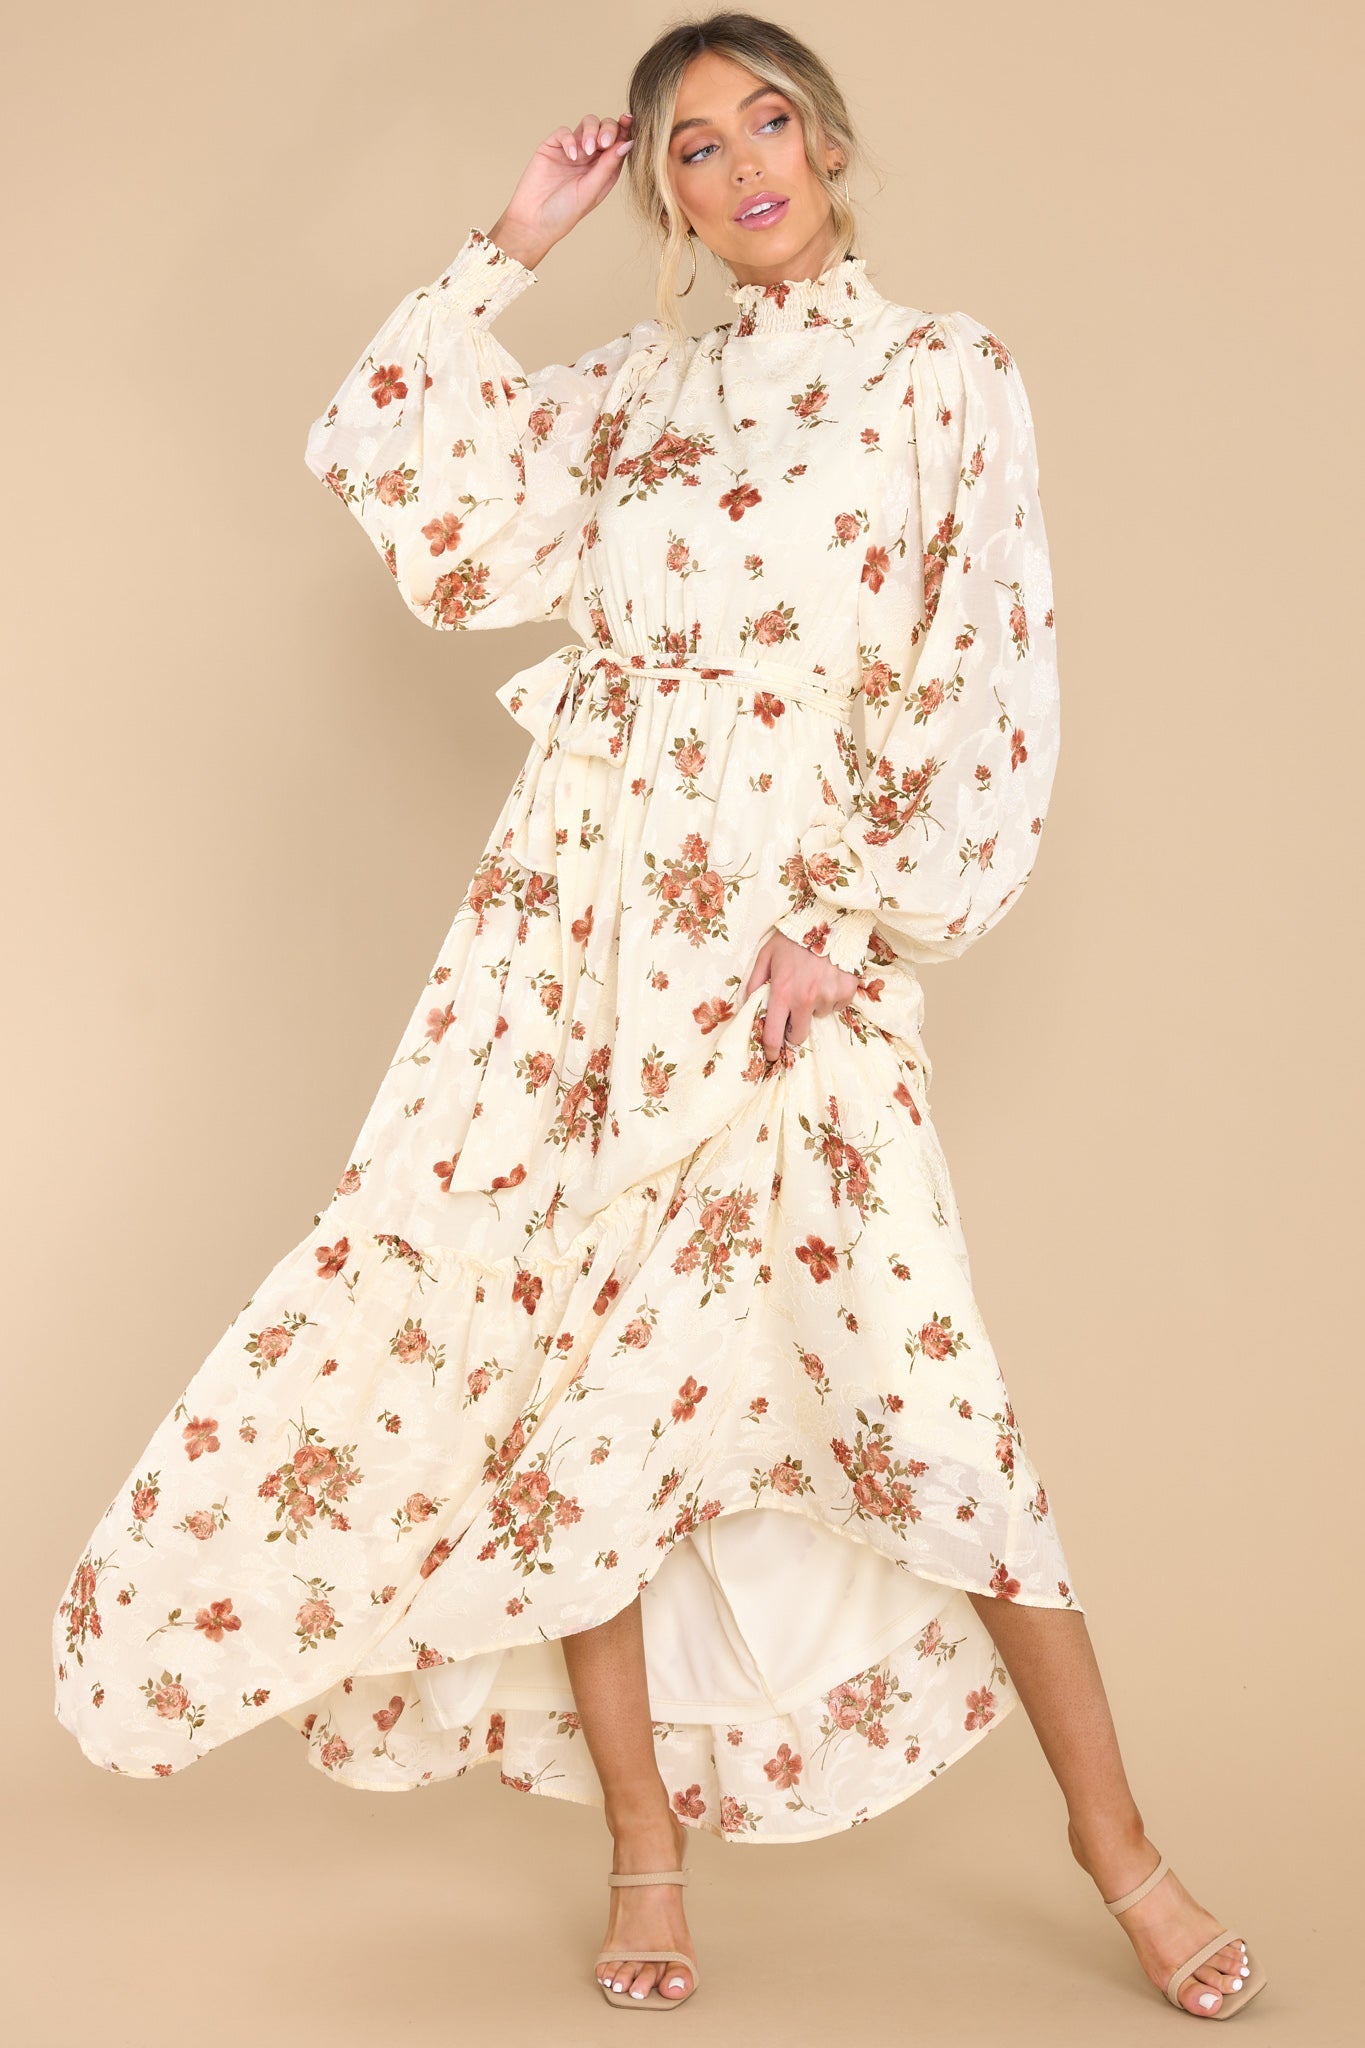 Love Is In The Air Ivory Floral Print Dress - Red Dress